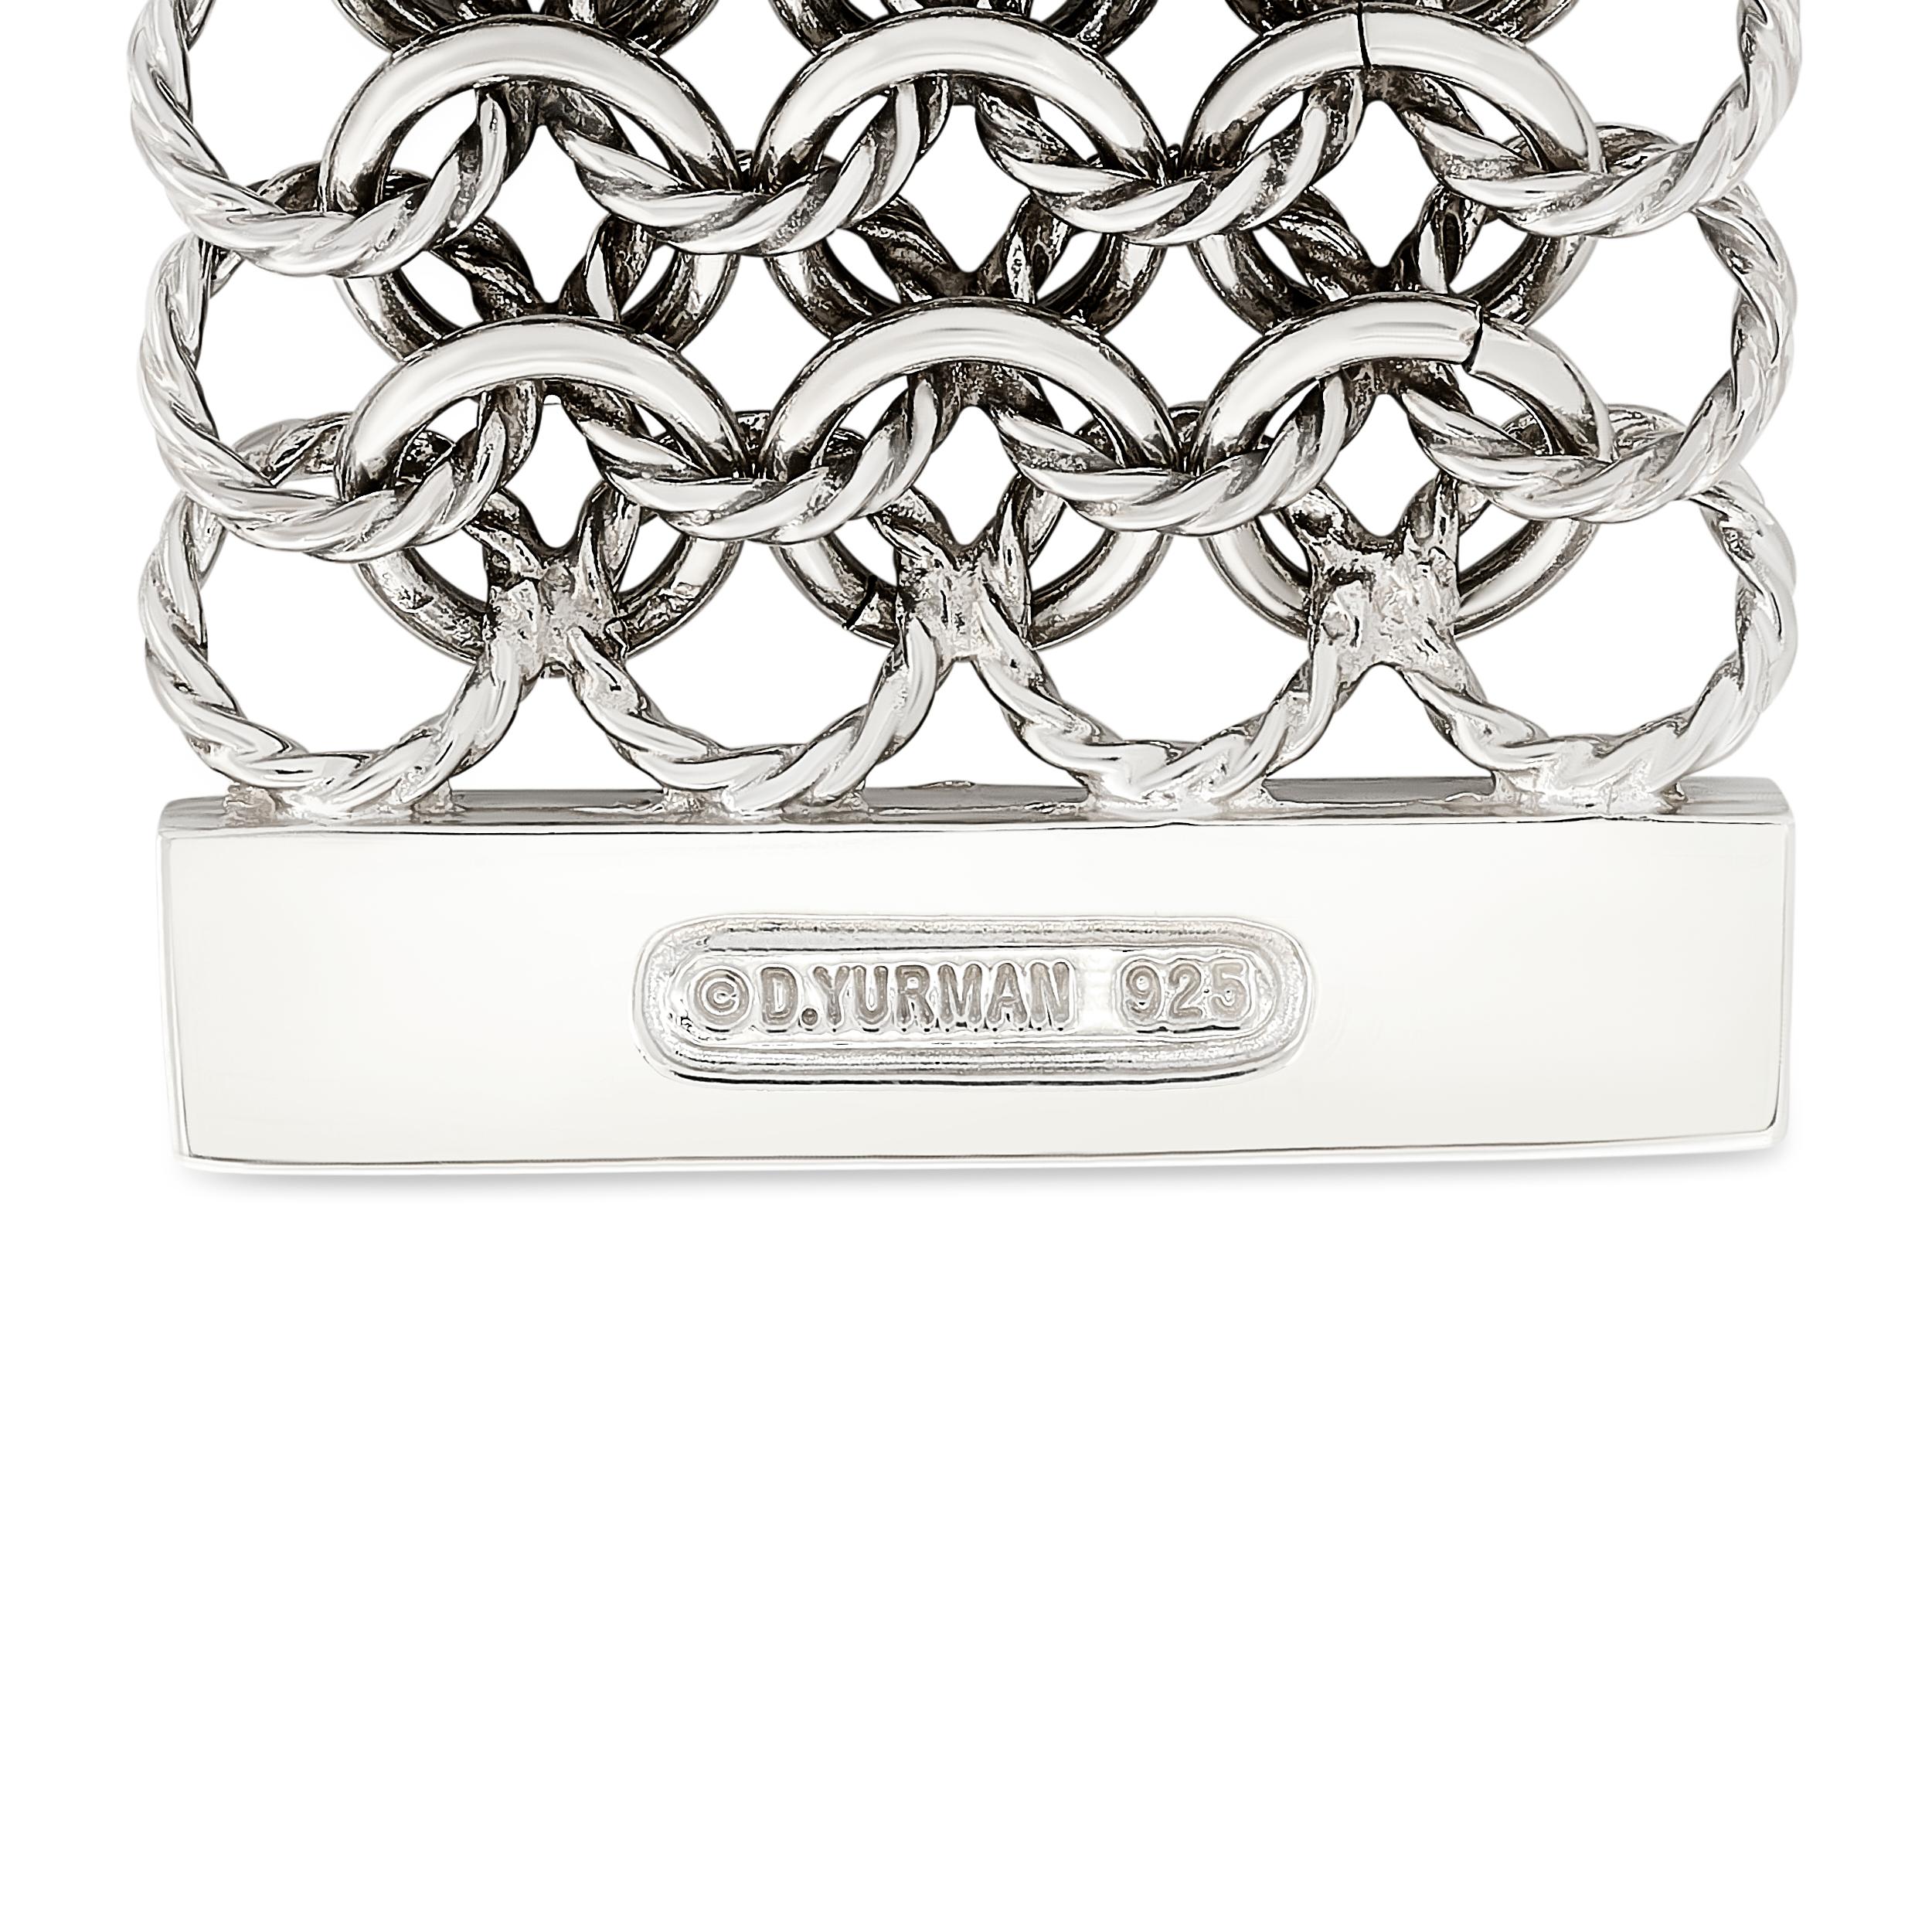 The elegant David Yurman sterling silver chain bracelet adorned with dazzling diamonds exudes timeless sophistication and refined luxury. The bracelet has 45 round diamonds weighing approximately 1.00 carat, VS quality and color ranging from H-J.